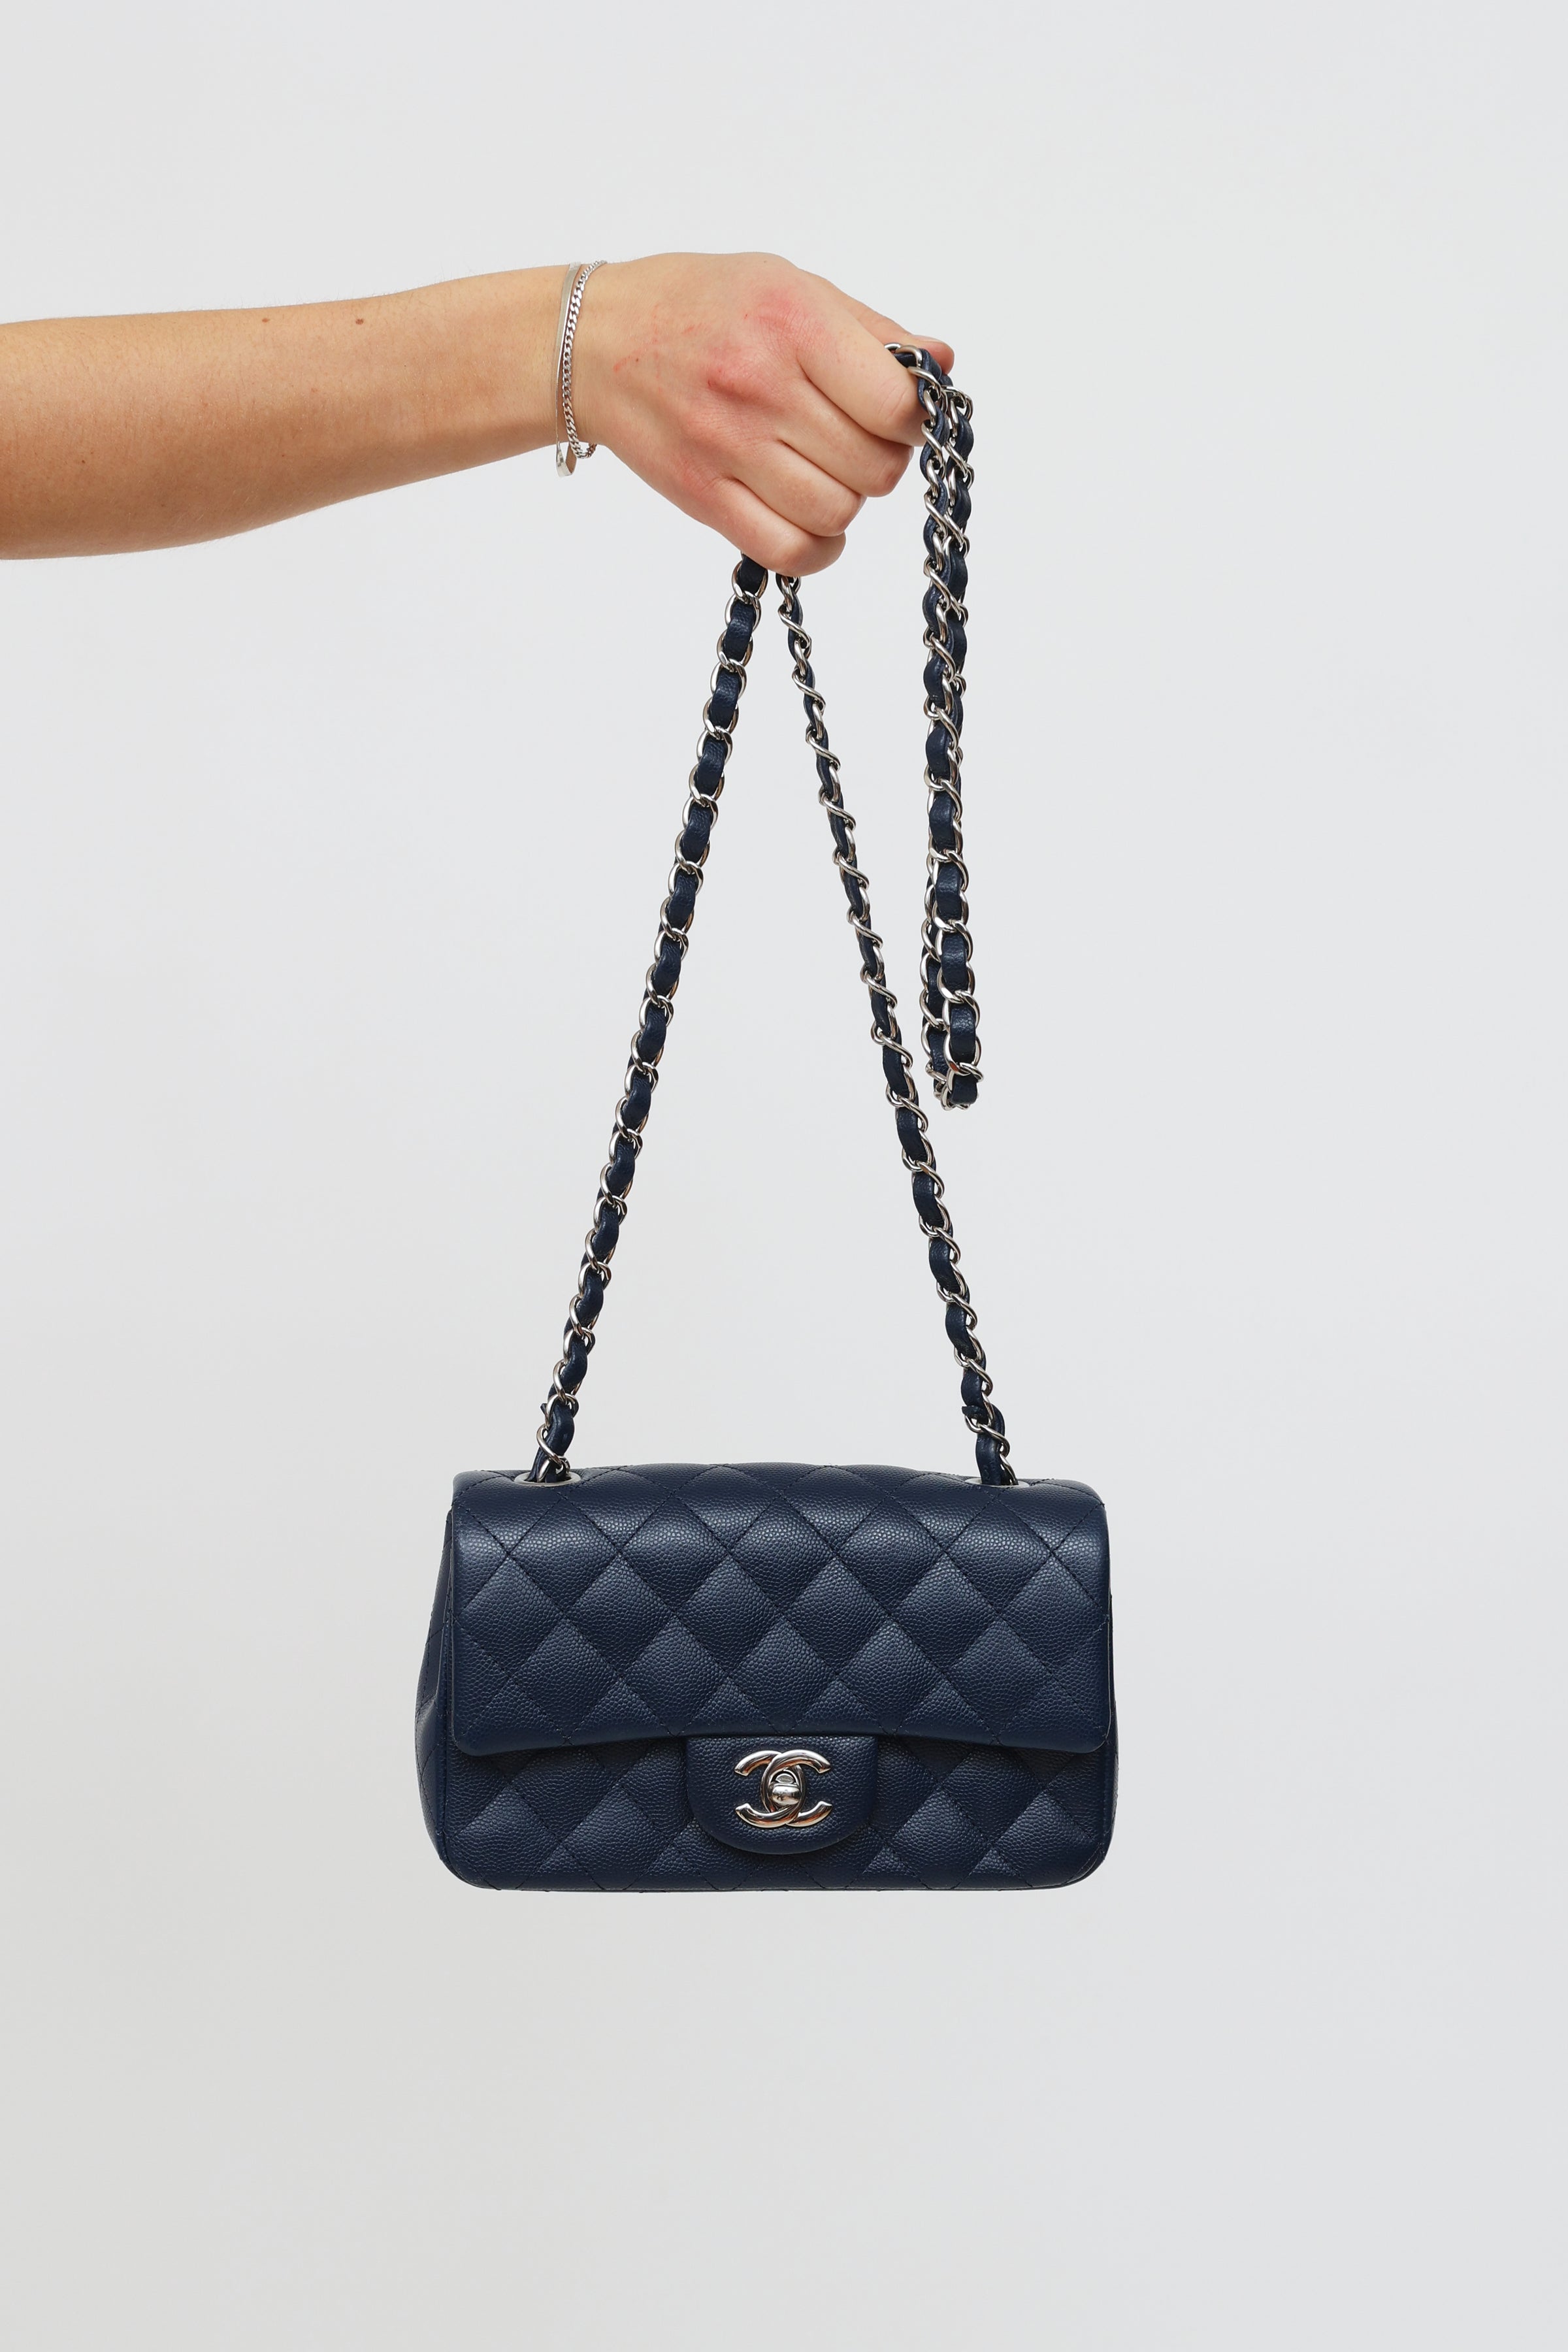 Sold at Auction: Chanel Caviar Navy Leather Flap Bag